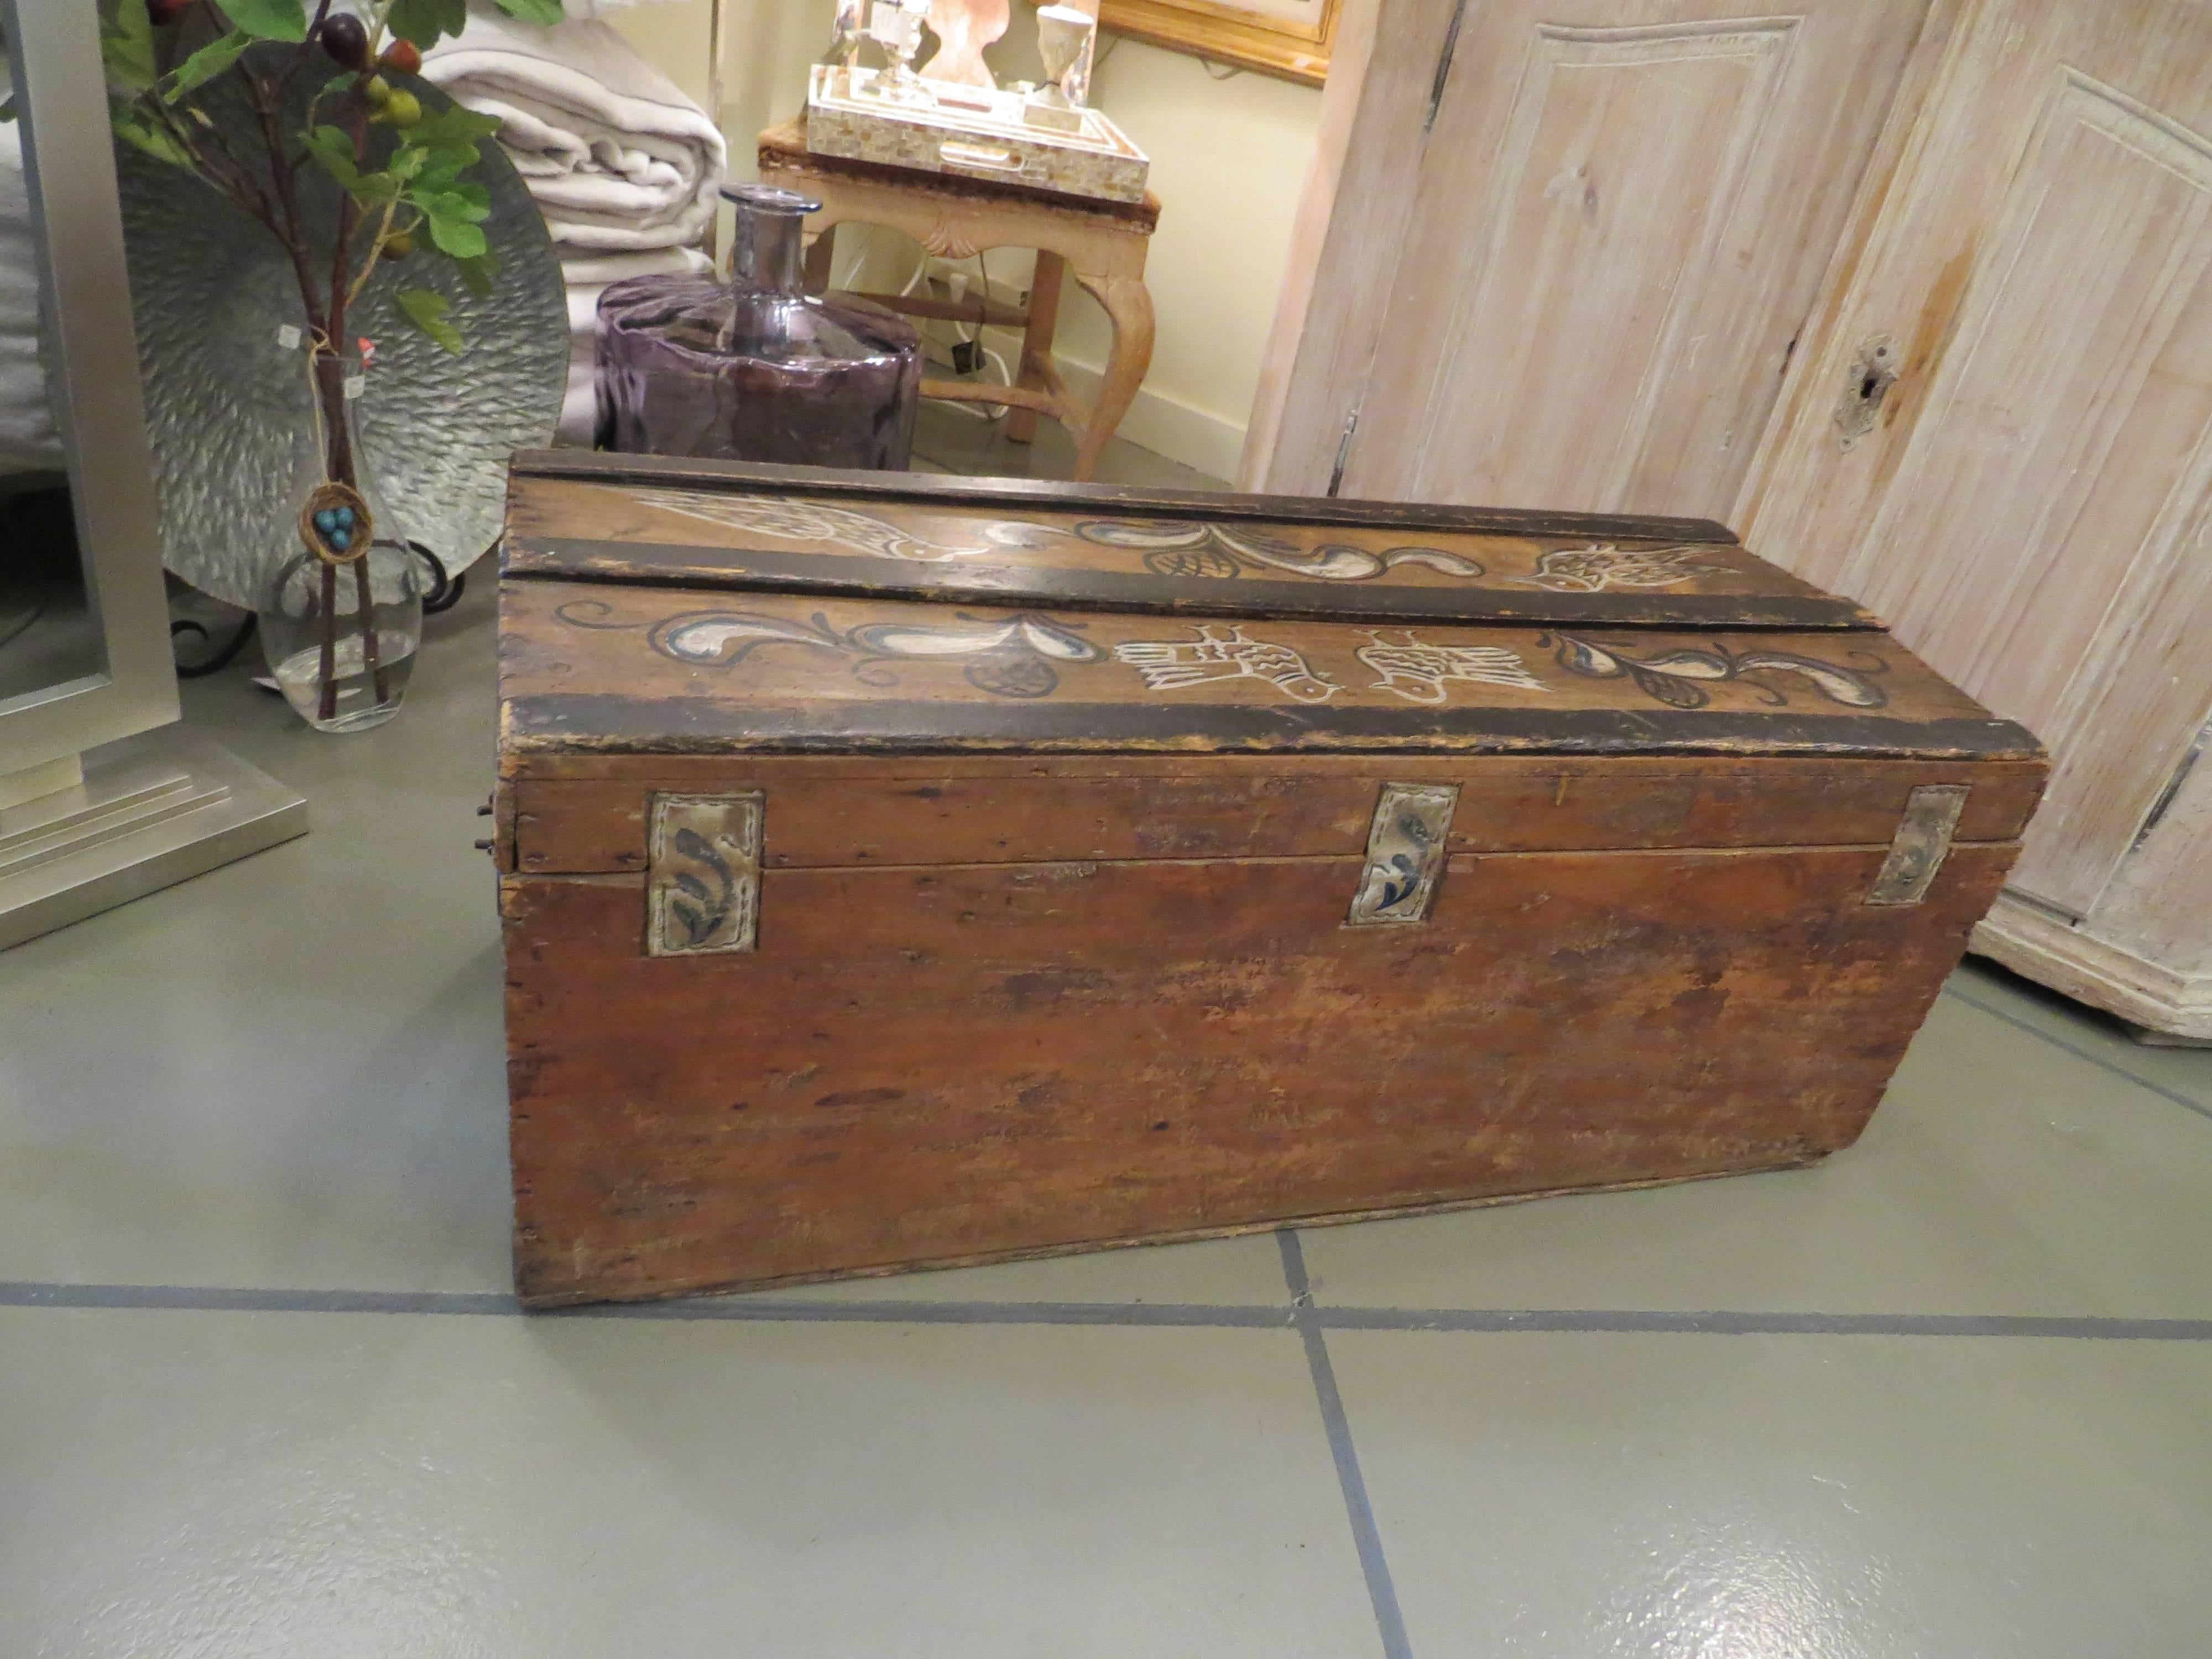 Hand-Crafted 19th Century Swedish Painted Wooden Folk Art Trunk